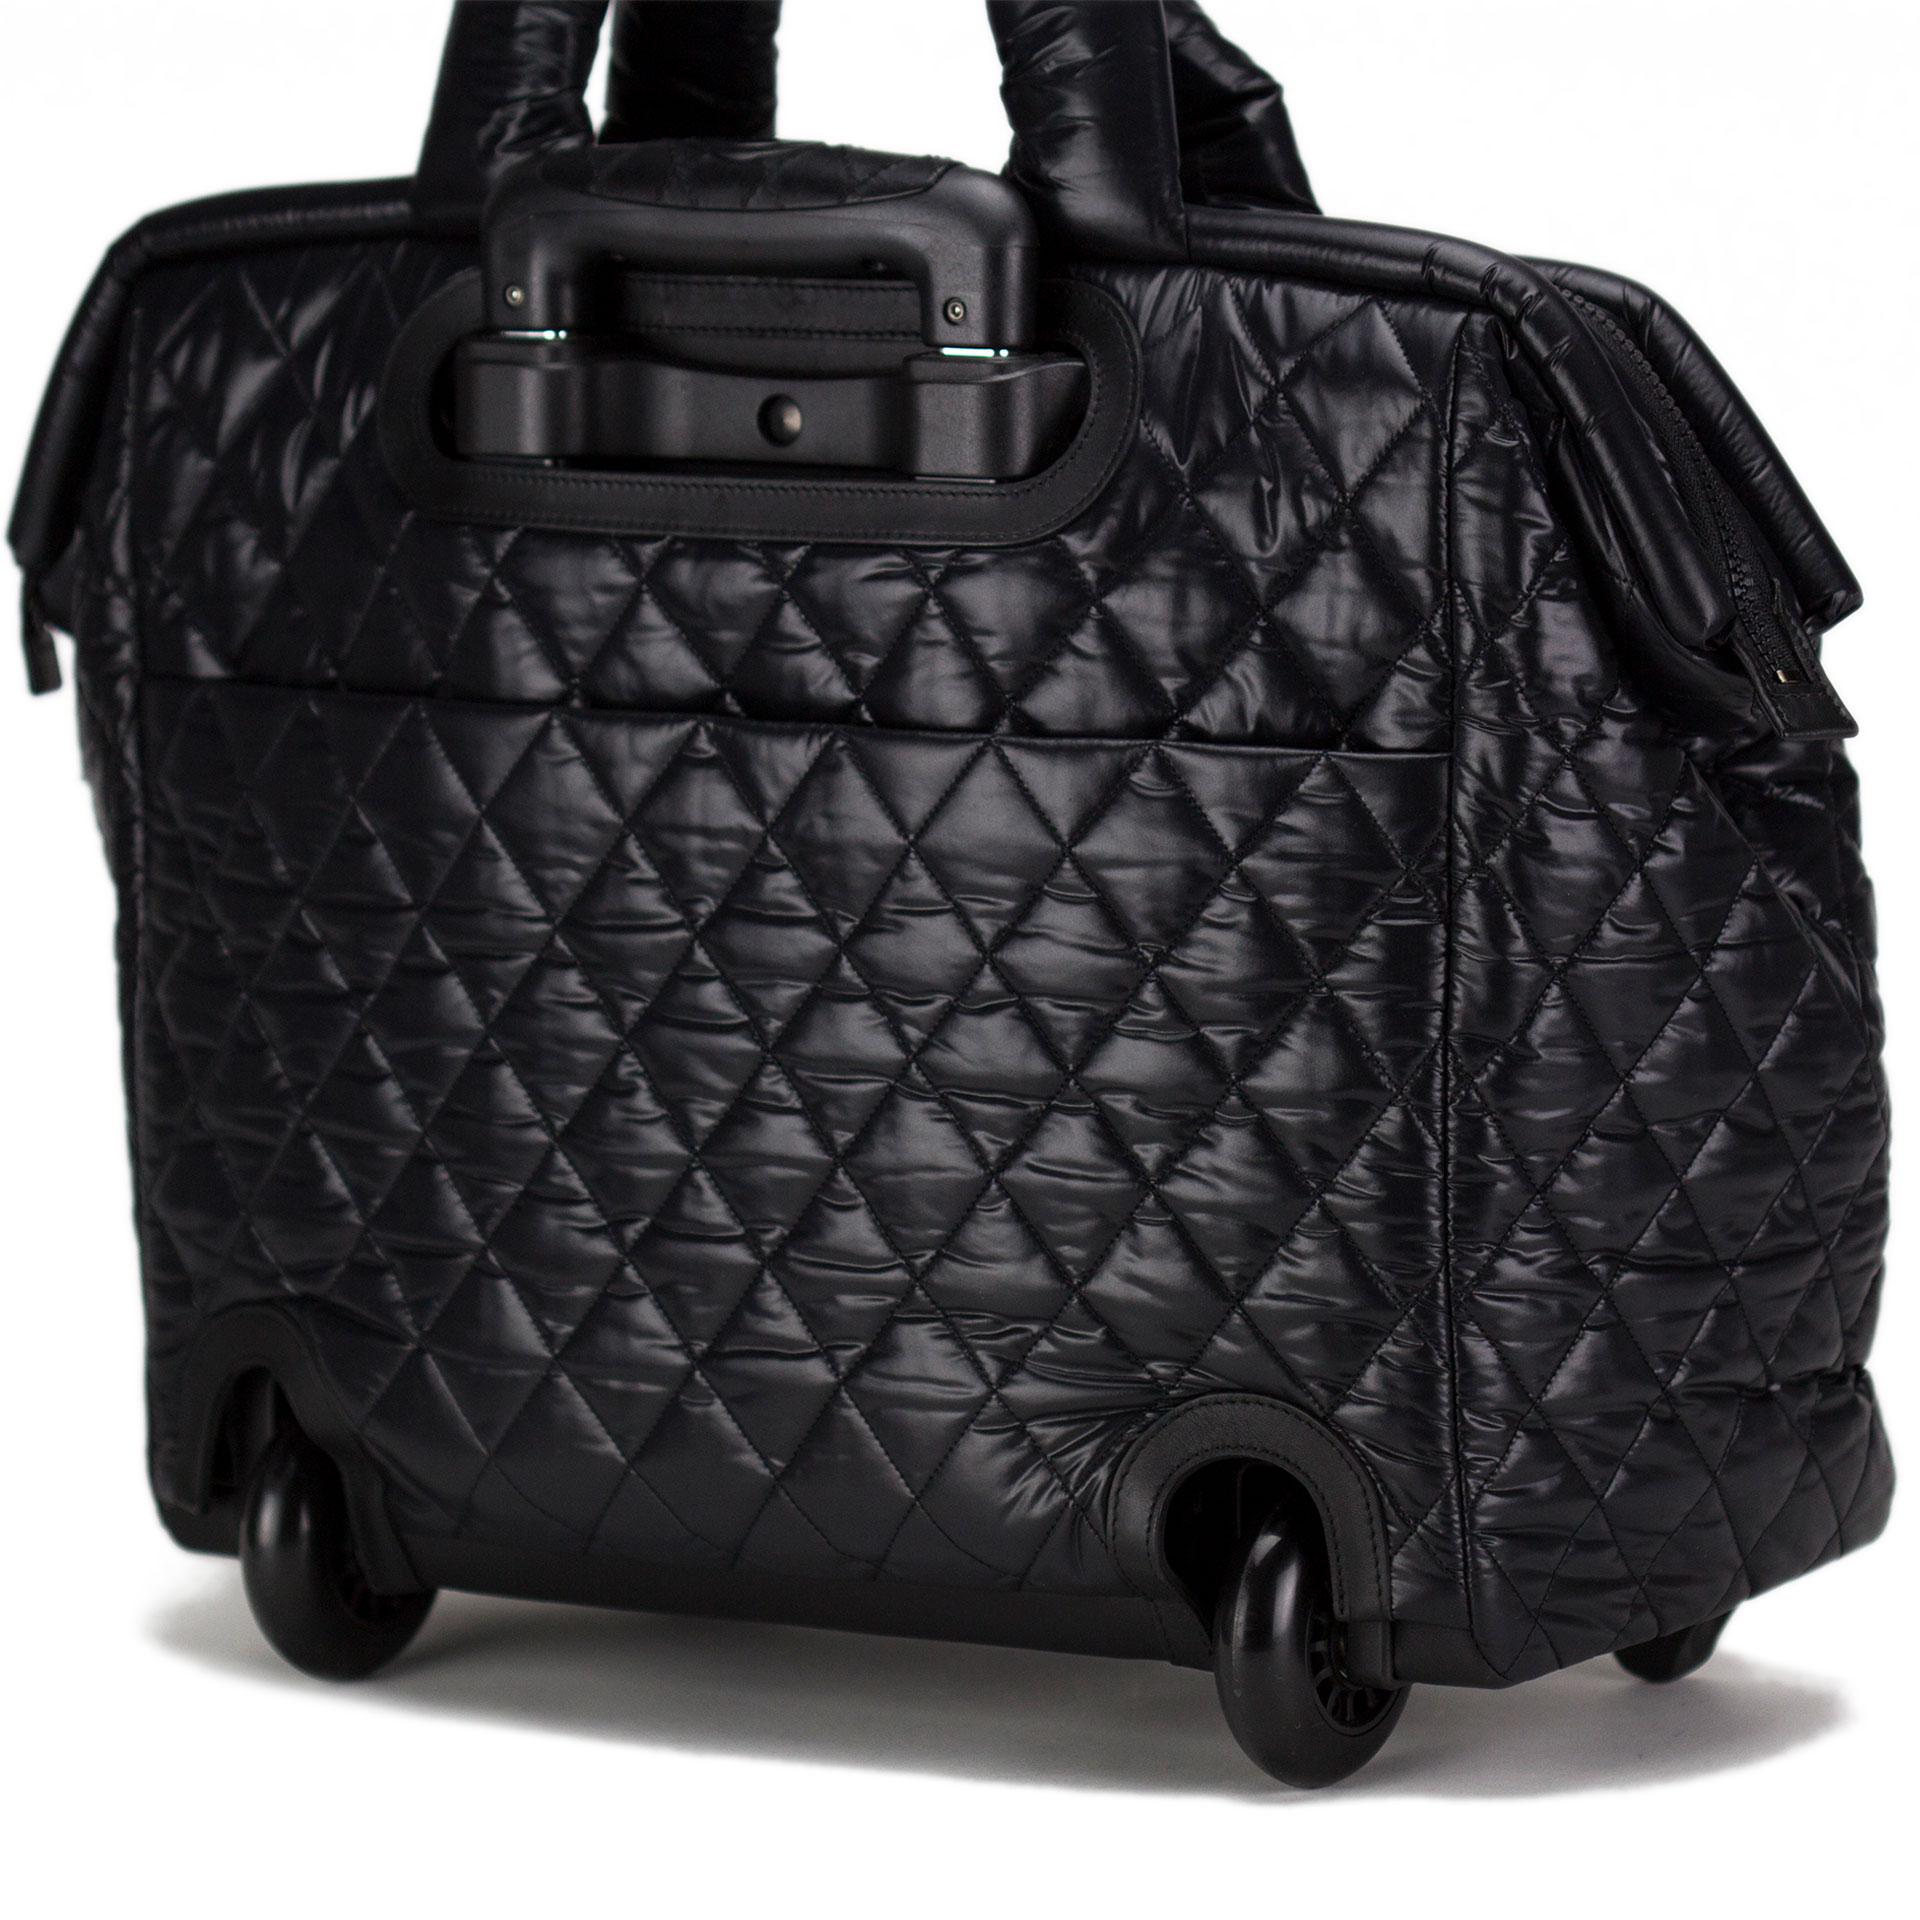 Chanel 2012 Coco Cocoon Quilted Case Carry On Trolley Travel Black Luggage Bag 4